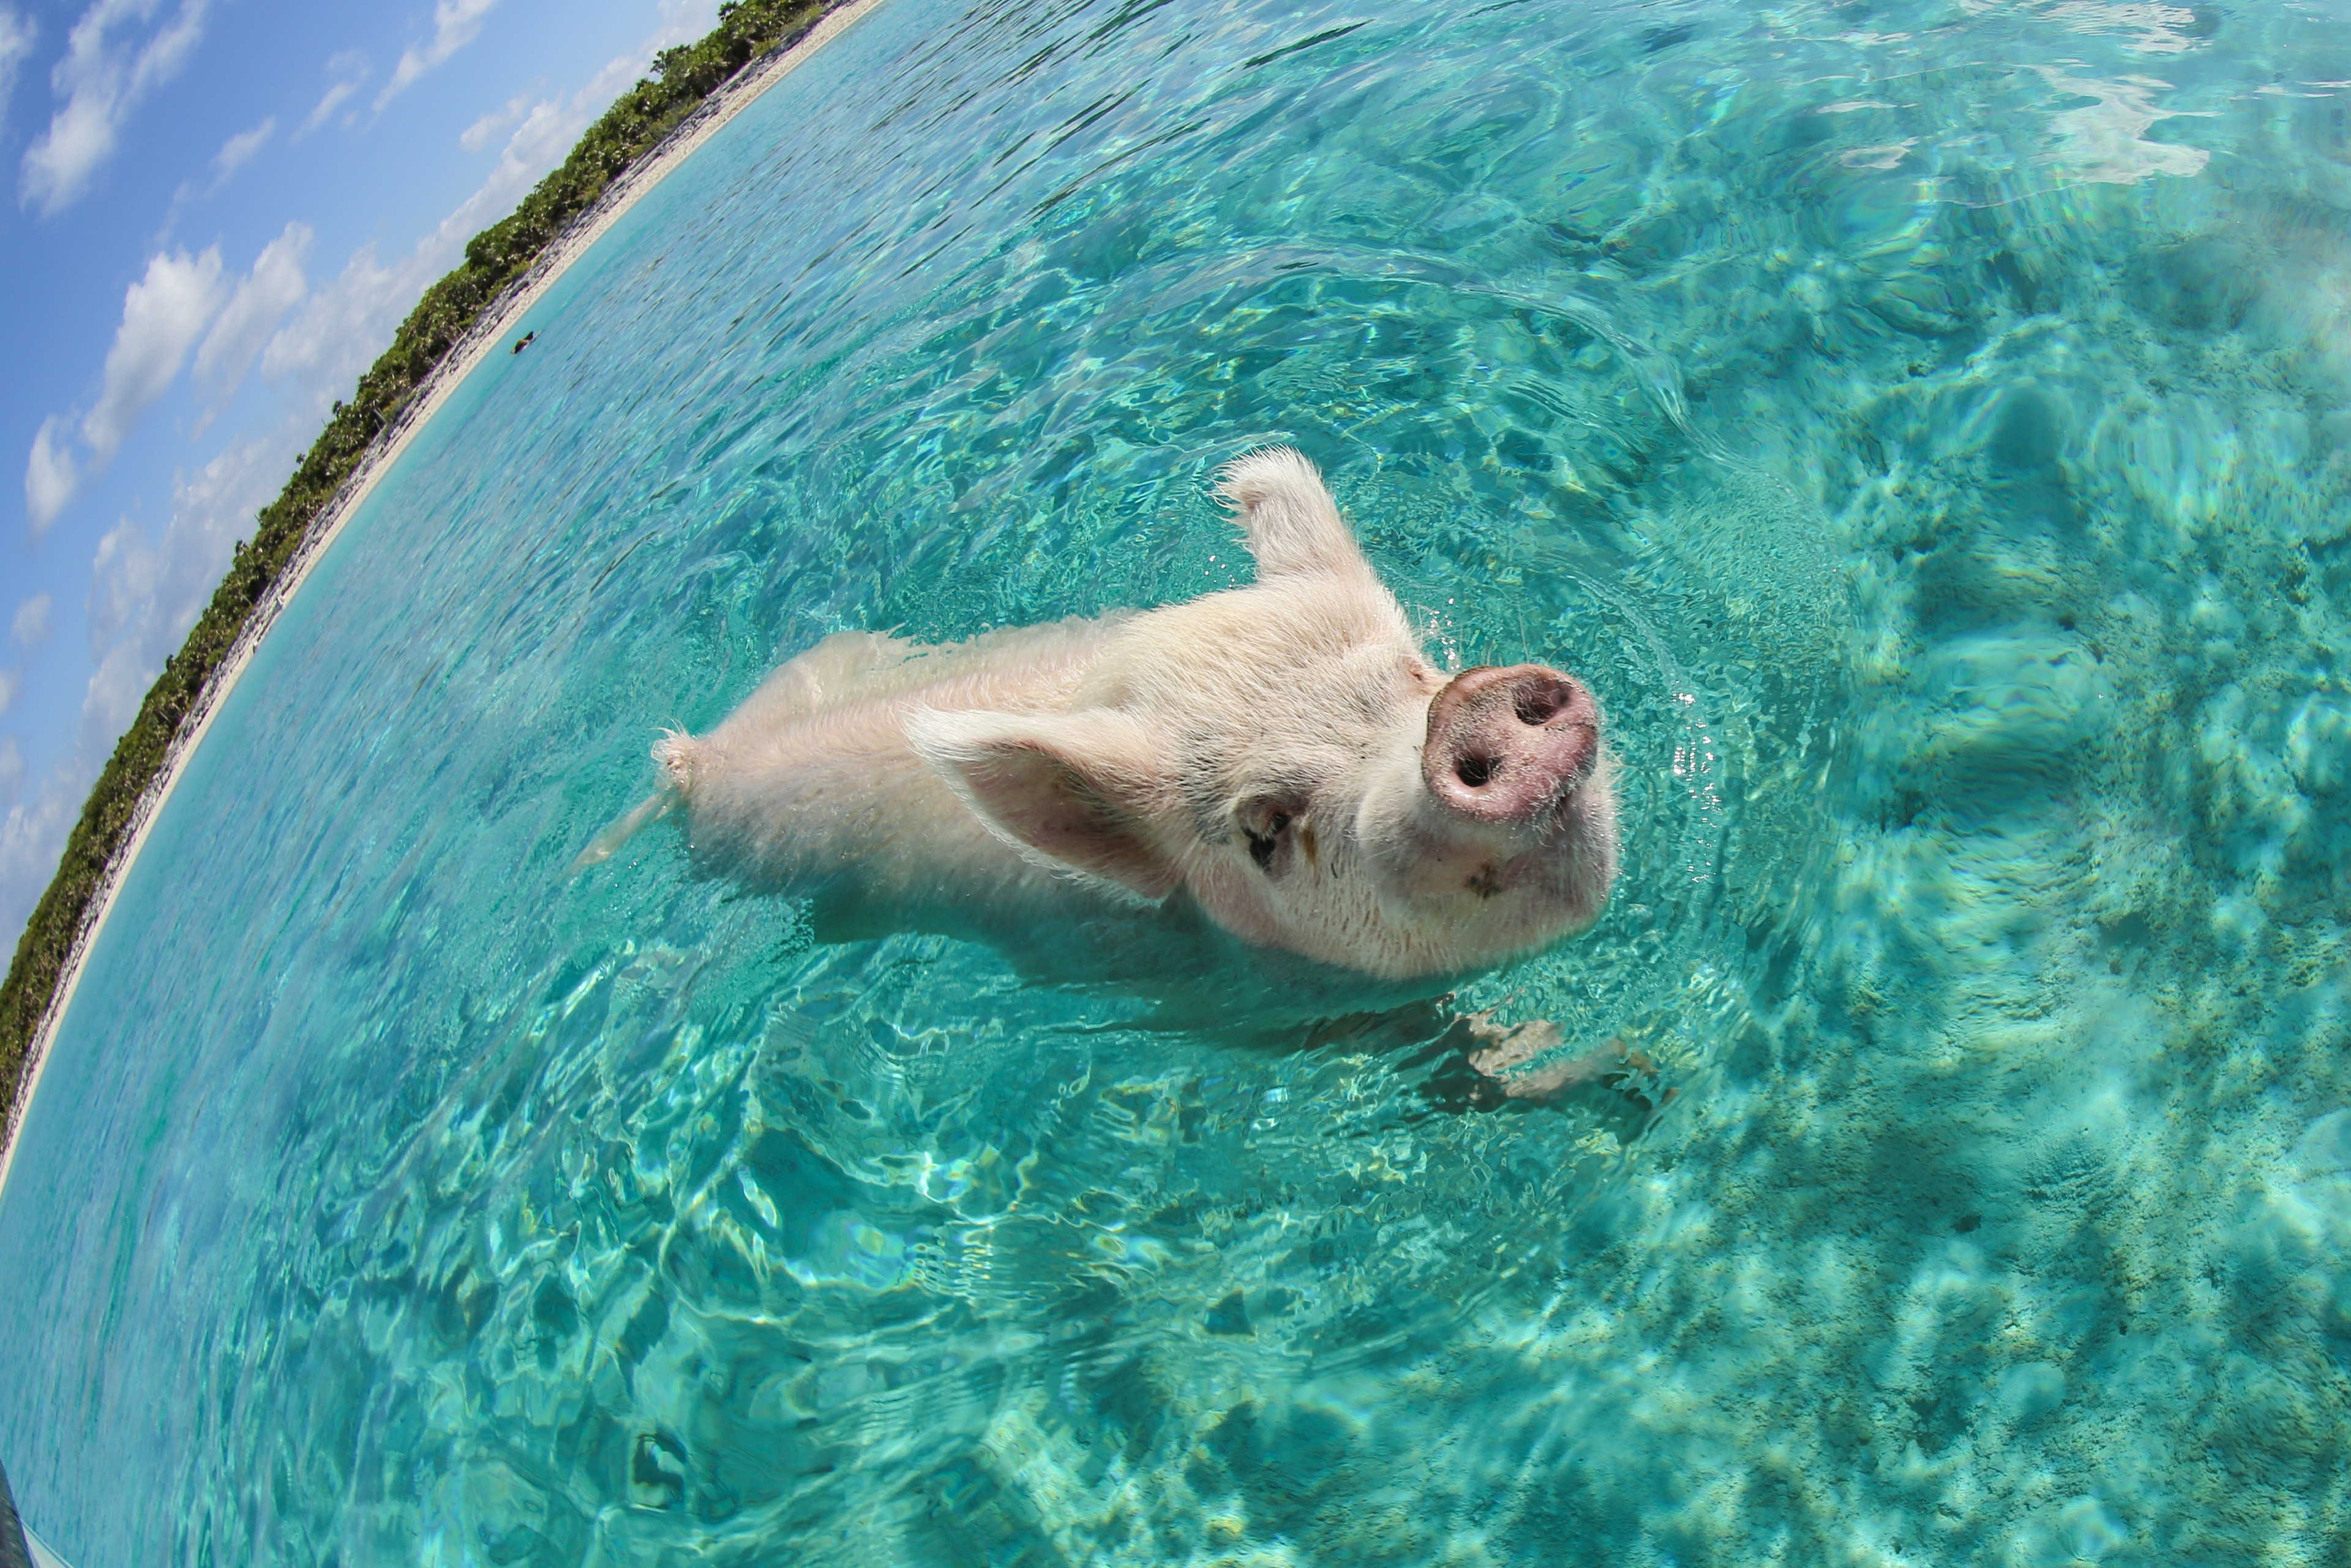 Pig In The Sea Wallpaper And Image Pictures Photos